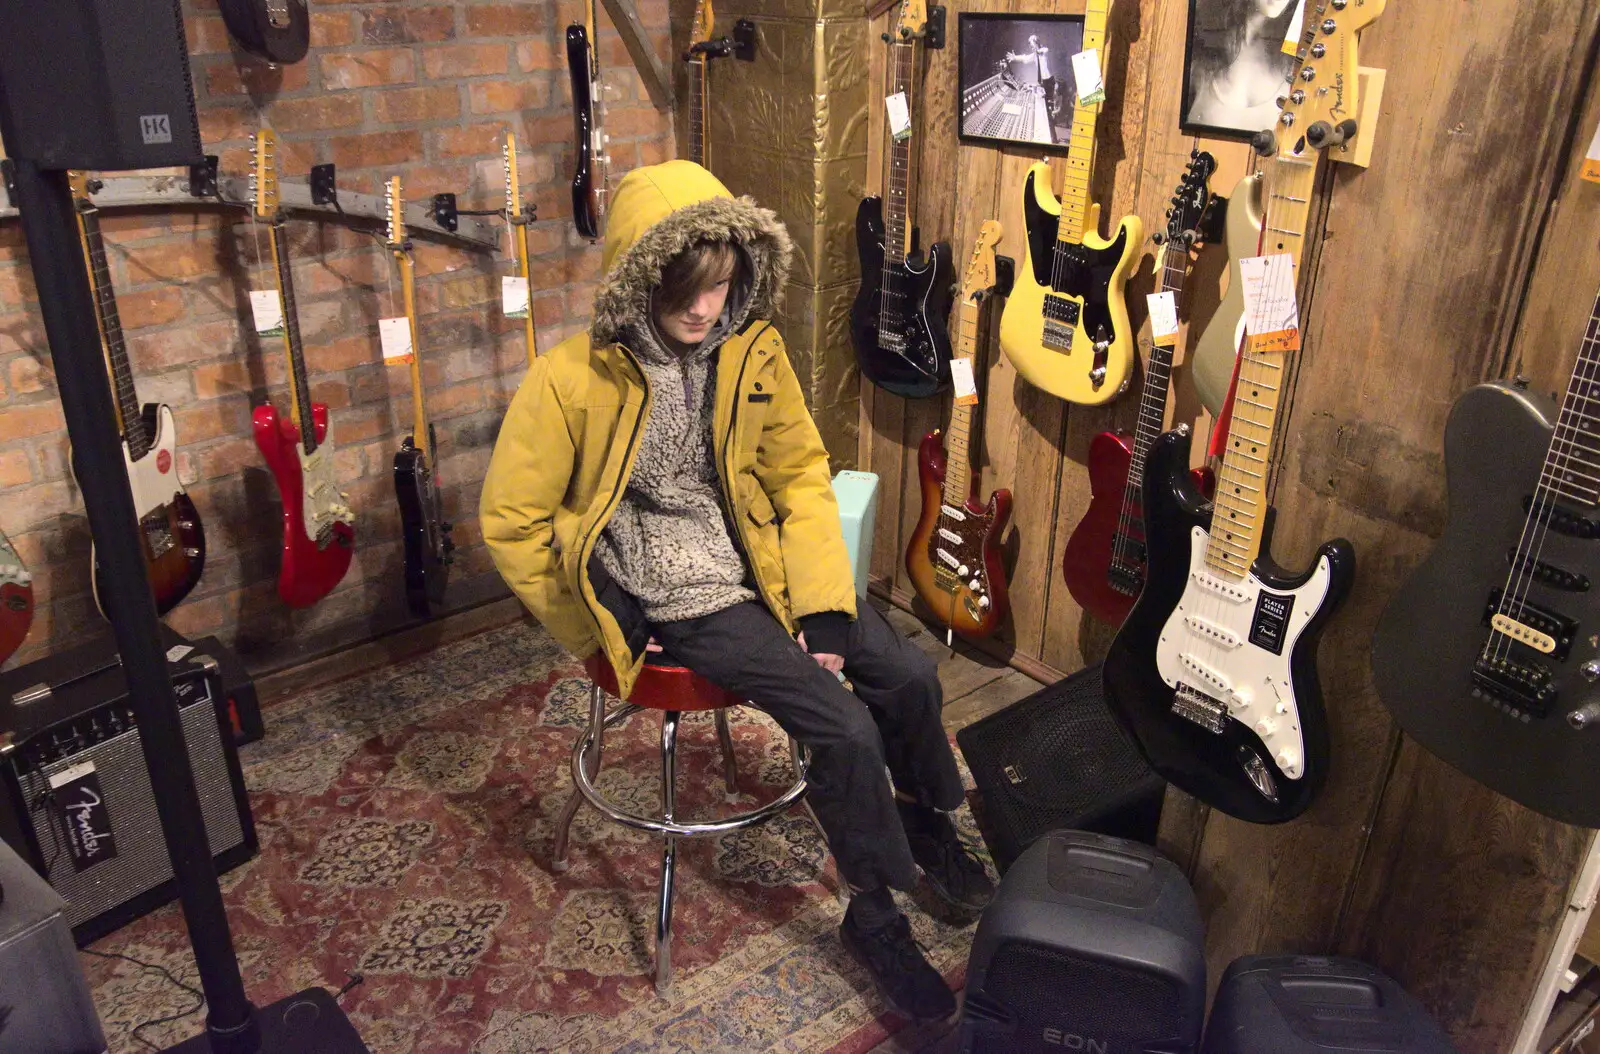 Harry tries the dum stool in the music shop, from Blackrock North and Newgrange, County Louth, Ireland - 16th February 2023